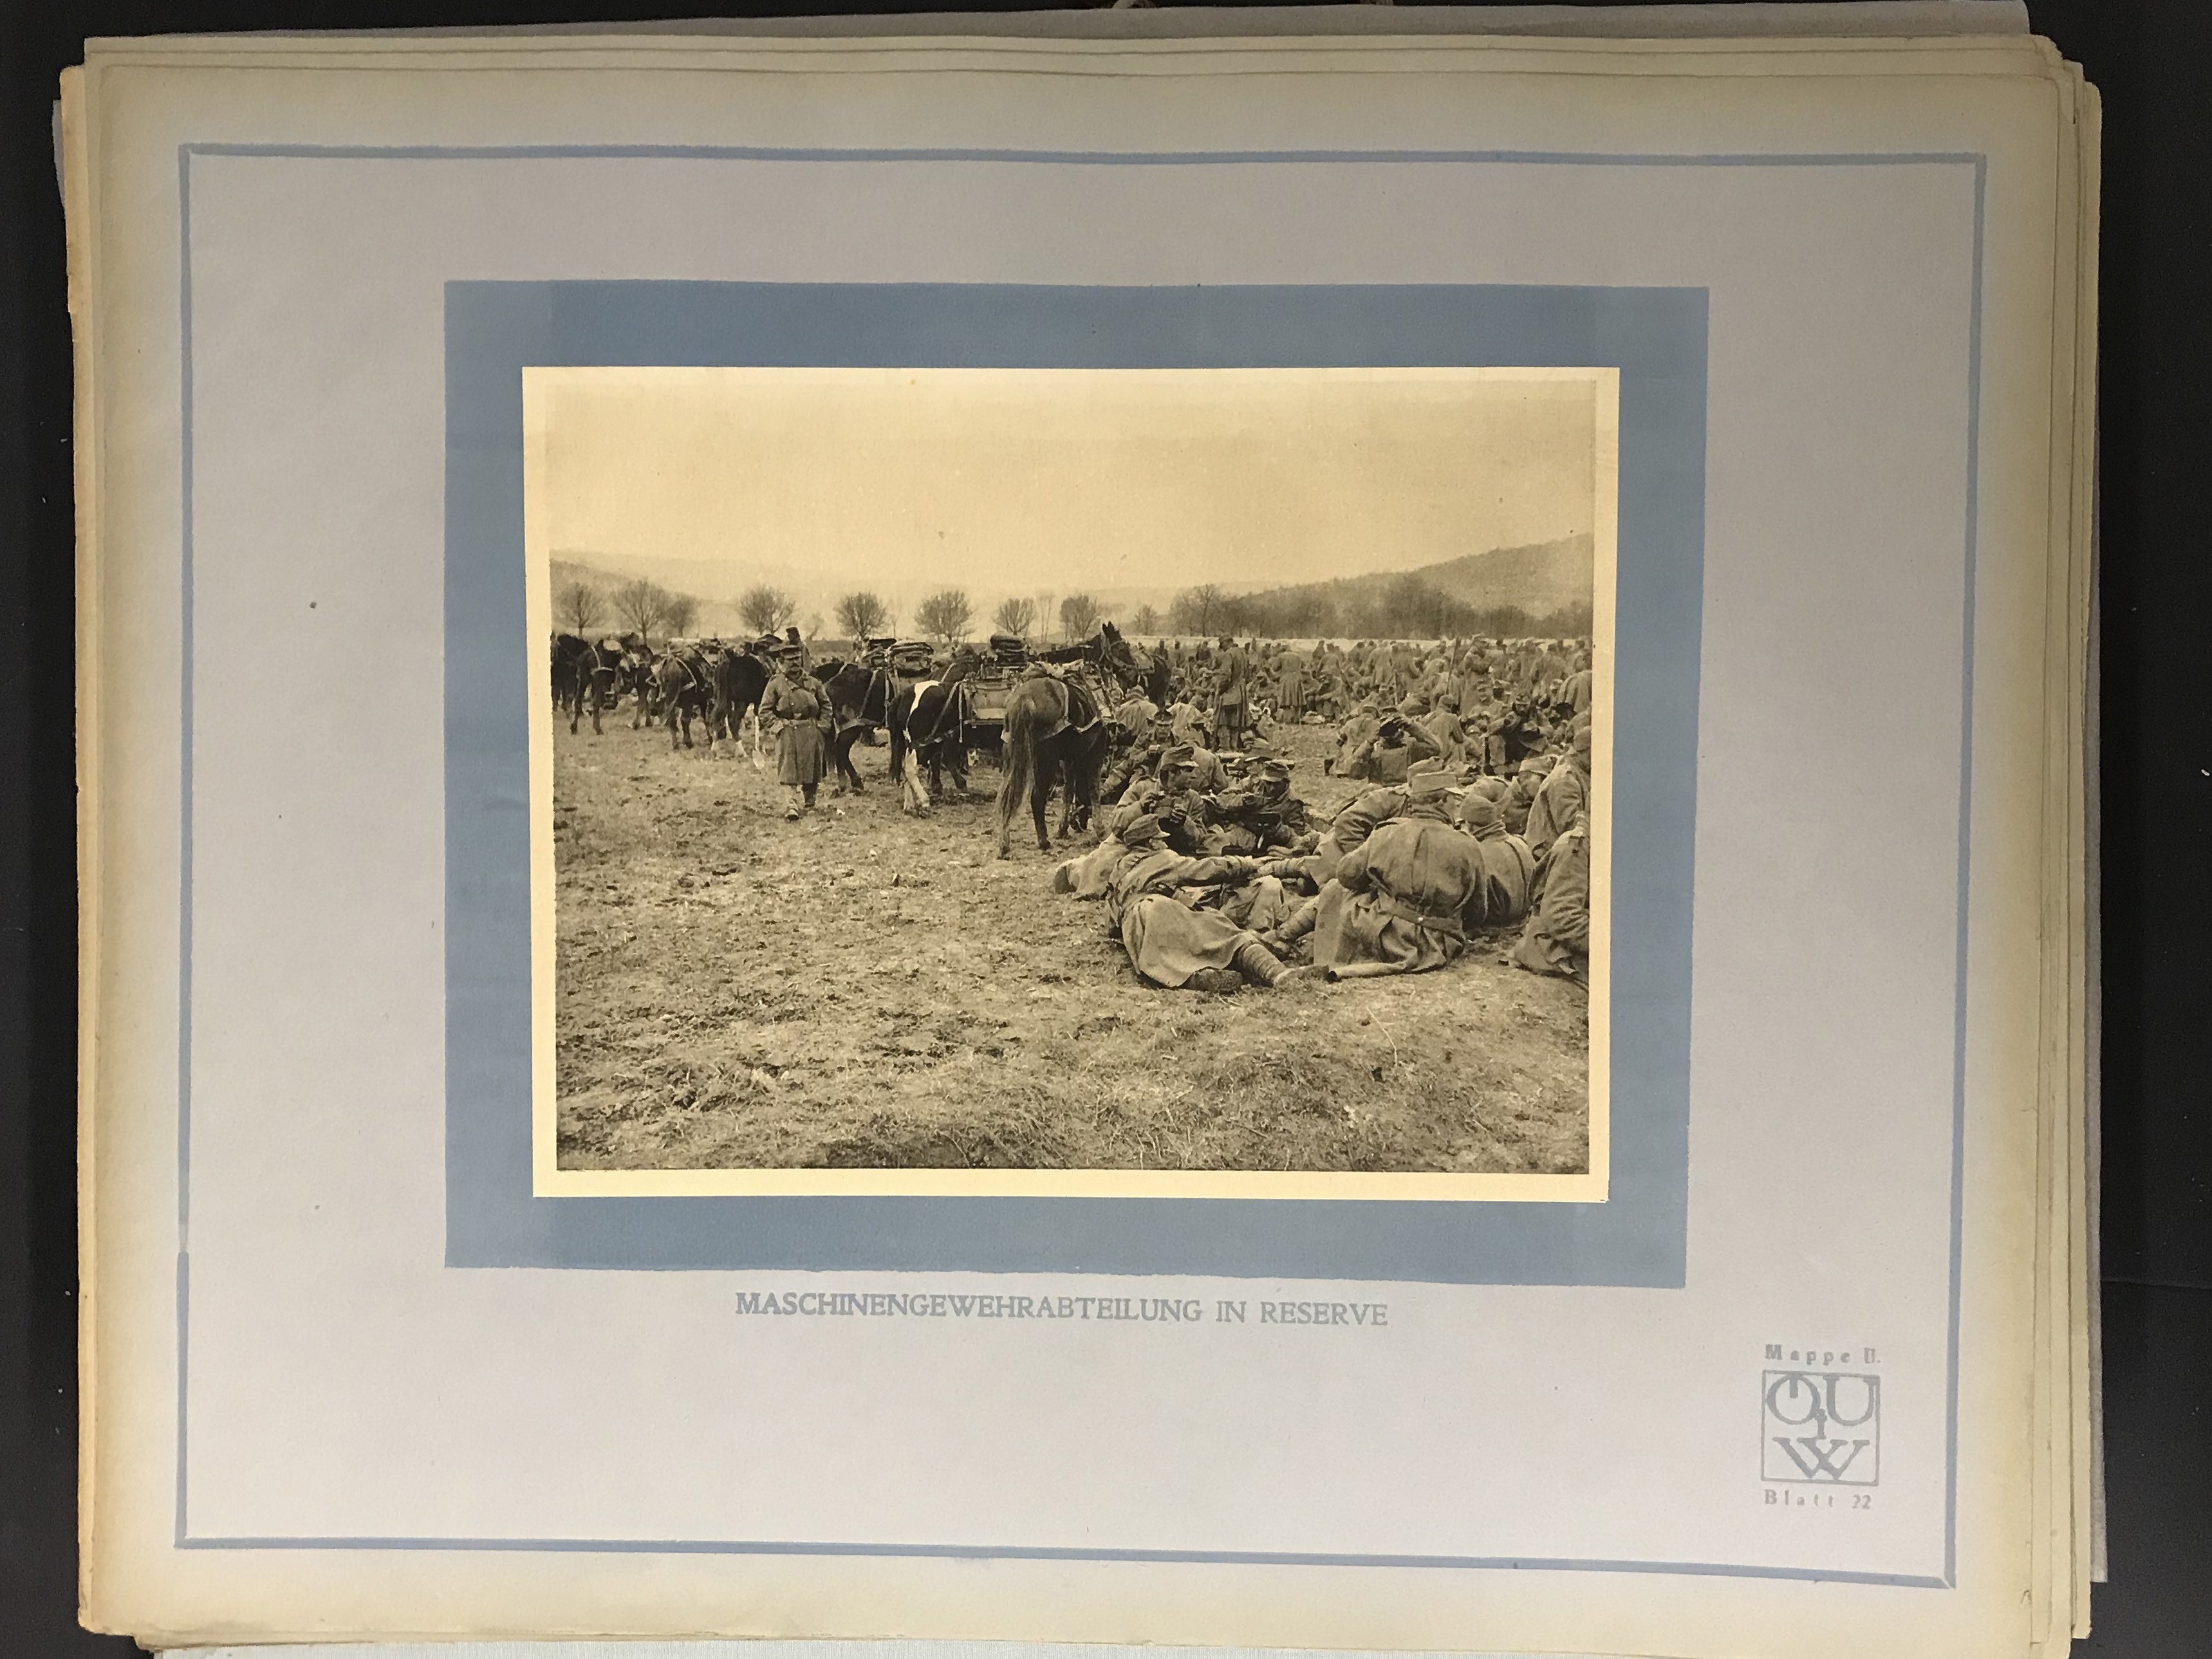 THREE LARGE PORTFOLIOS OF PHOTOGRAPHS OF AUSTRIA-HUNGARY IN ARMS WAR ARCHIVE - Image 11 of 24